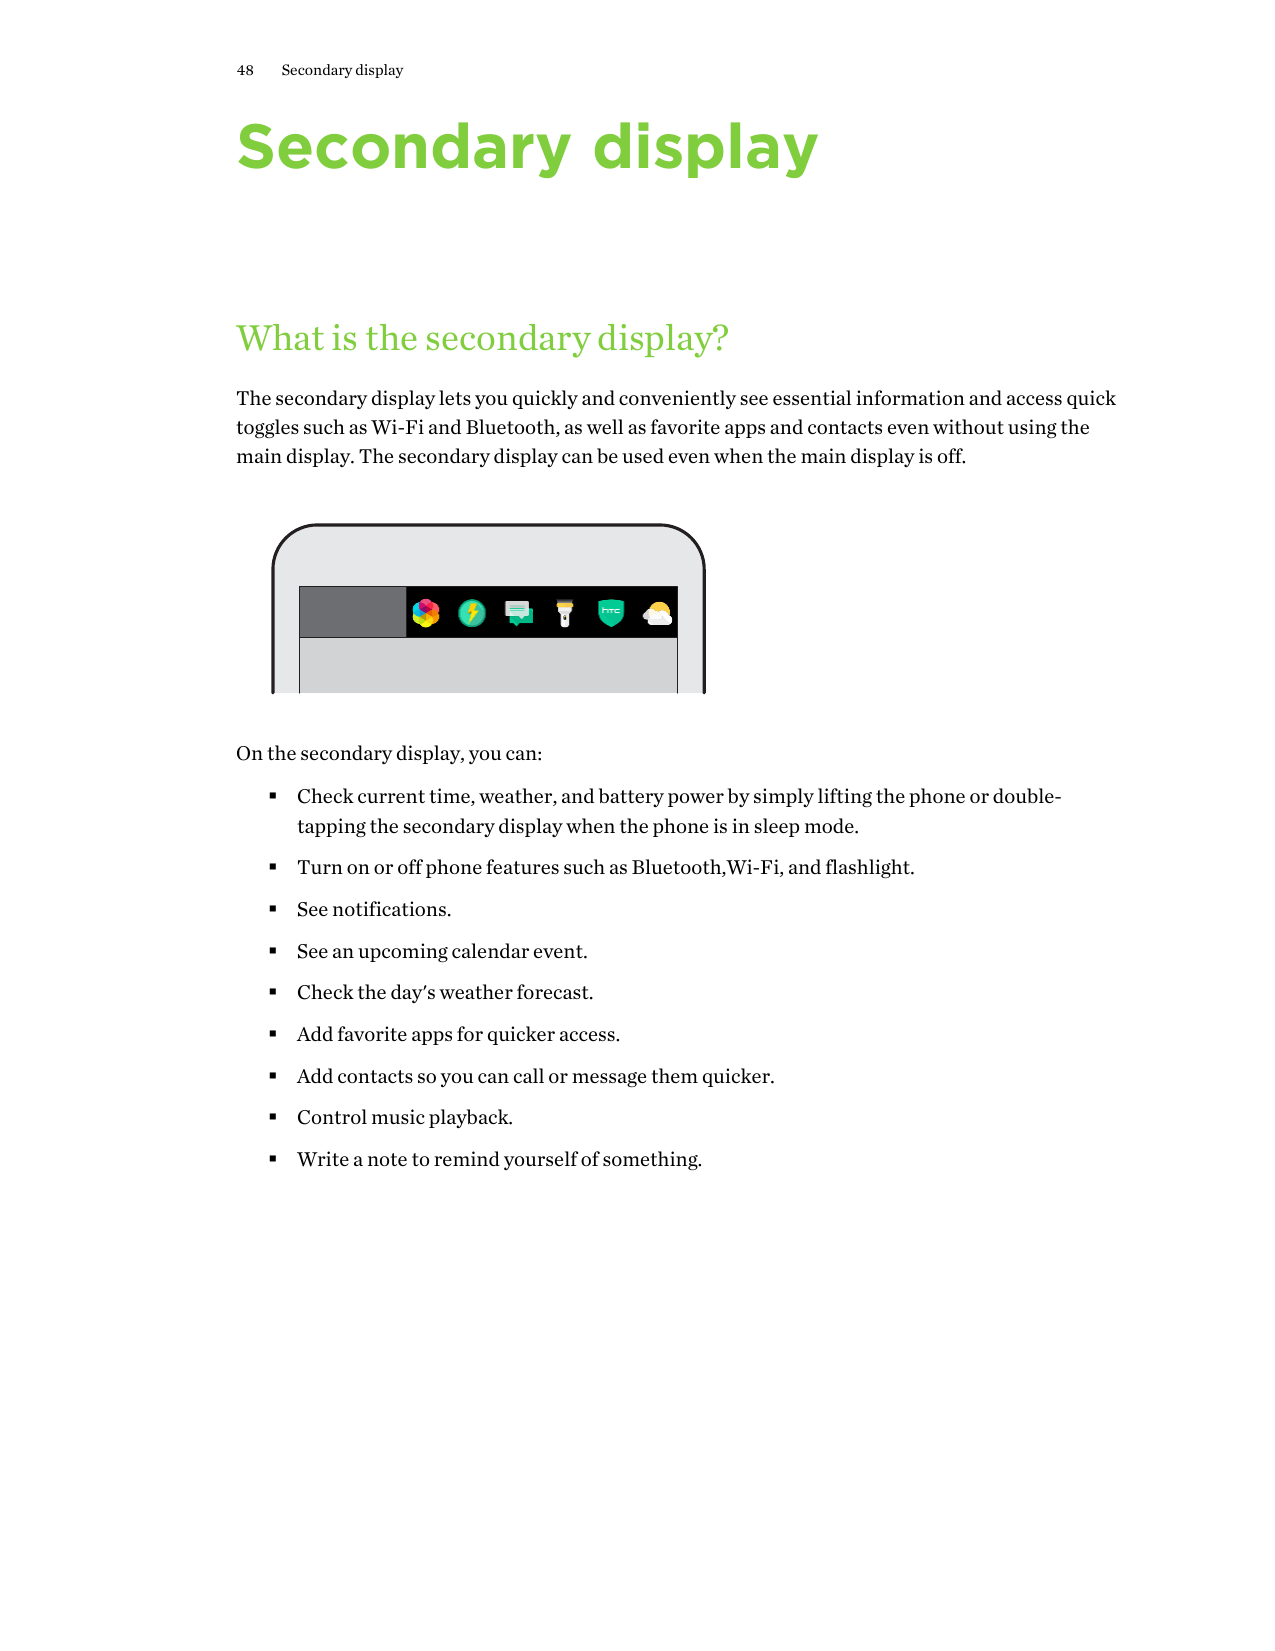 48Secondary displaySecondary displayWhat is the secondary display?The secondary display lets you quickly and conveniently see es